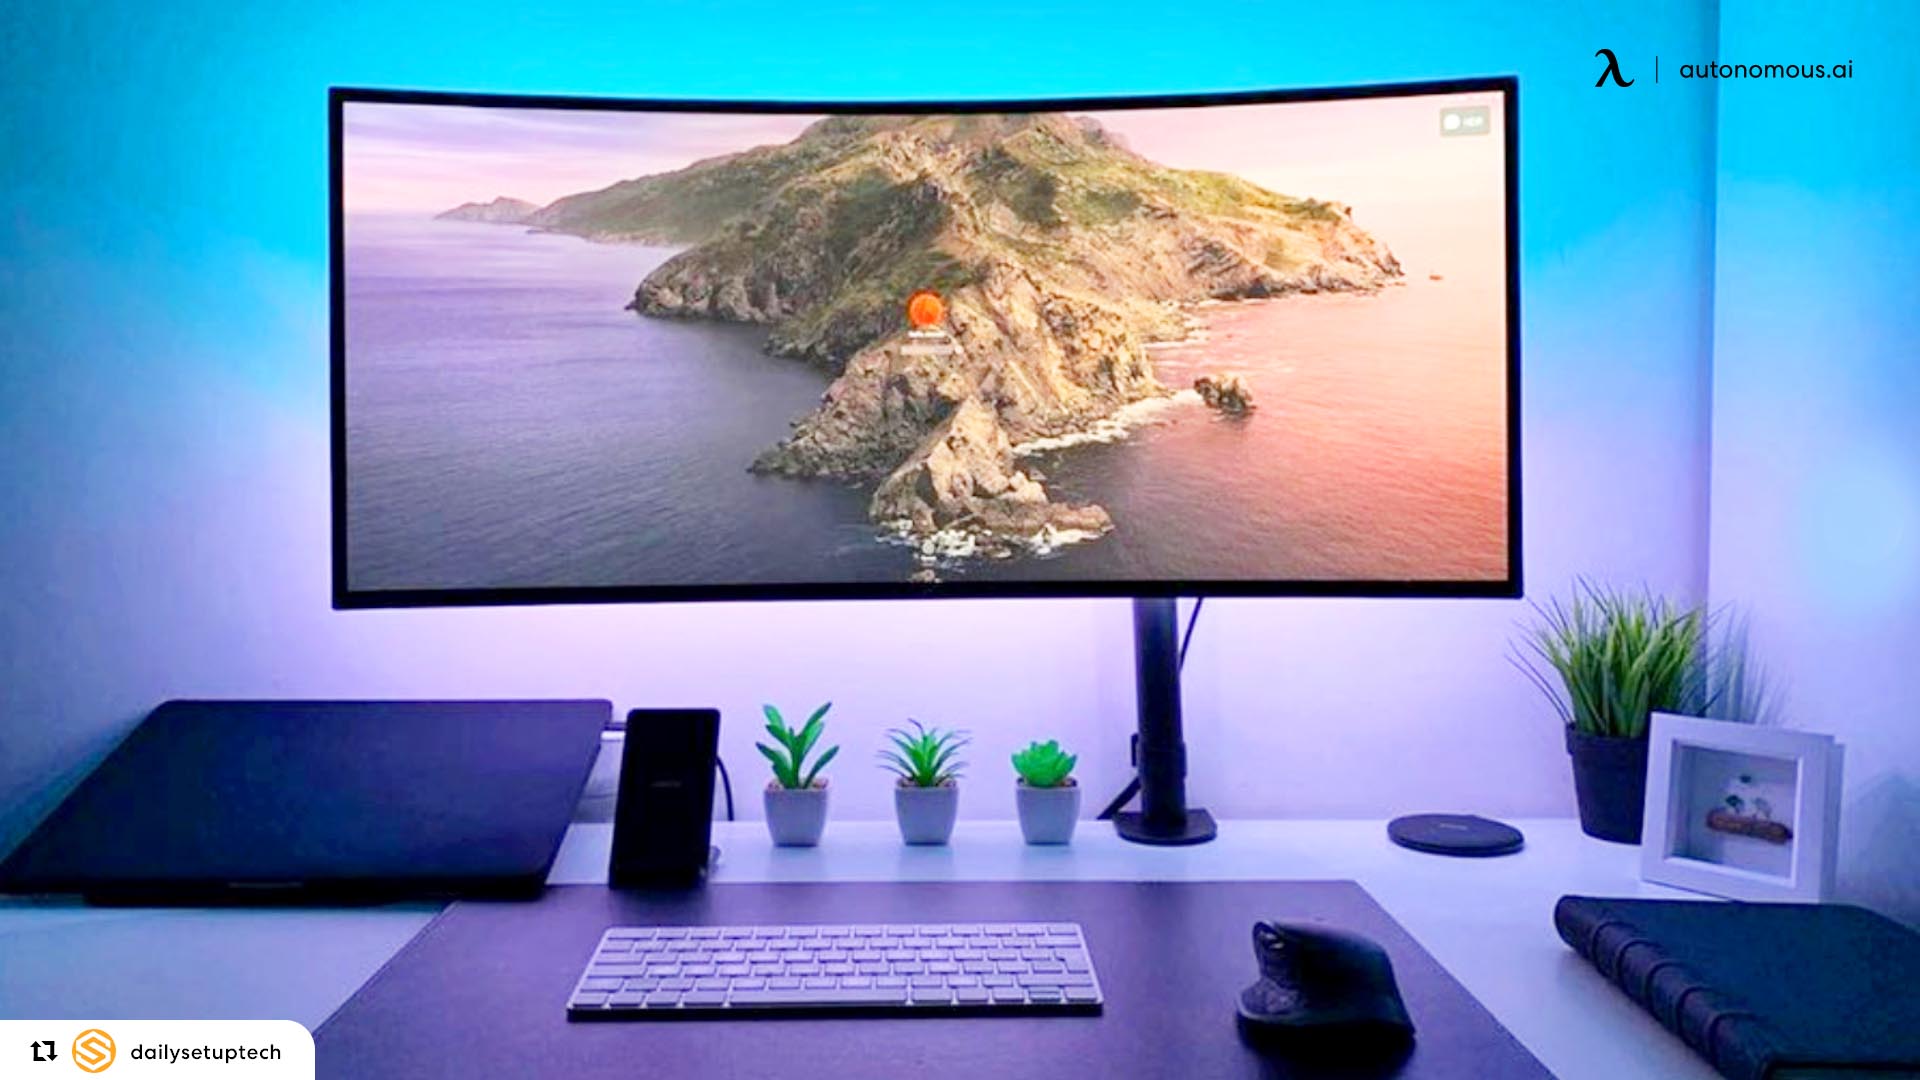 You may lose most of your wall space to a curved monitor.